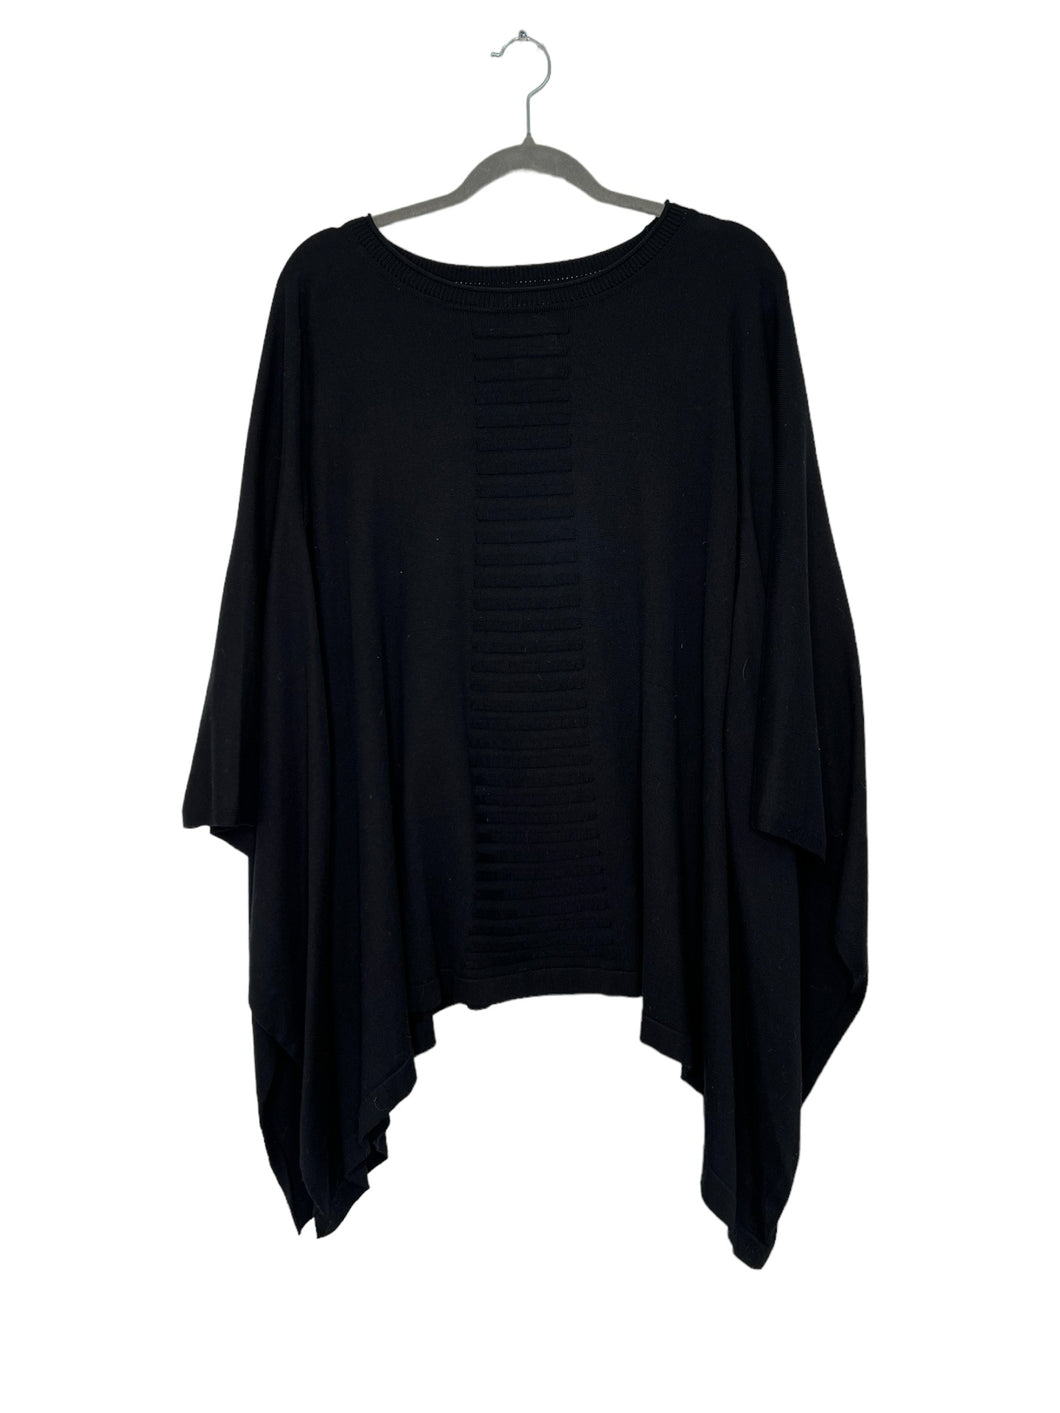 Planet Size One Size Black Sweater- Ladies